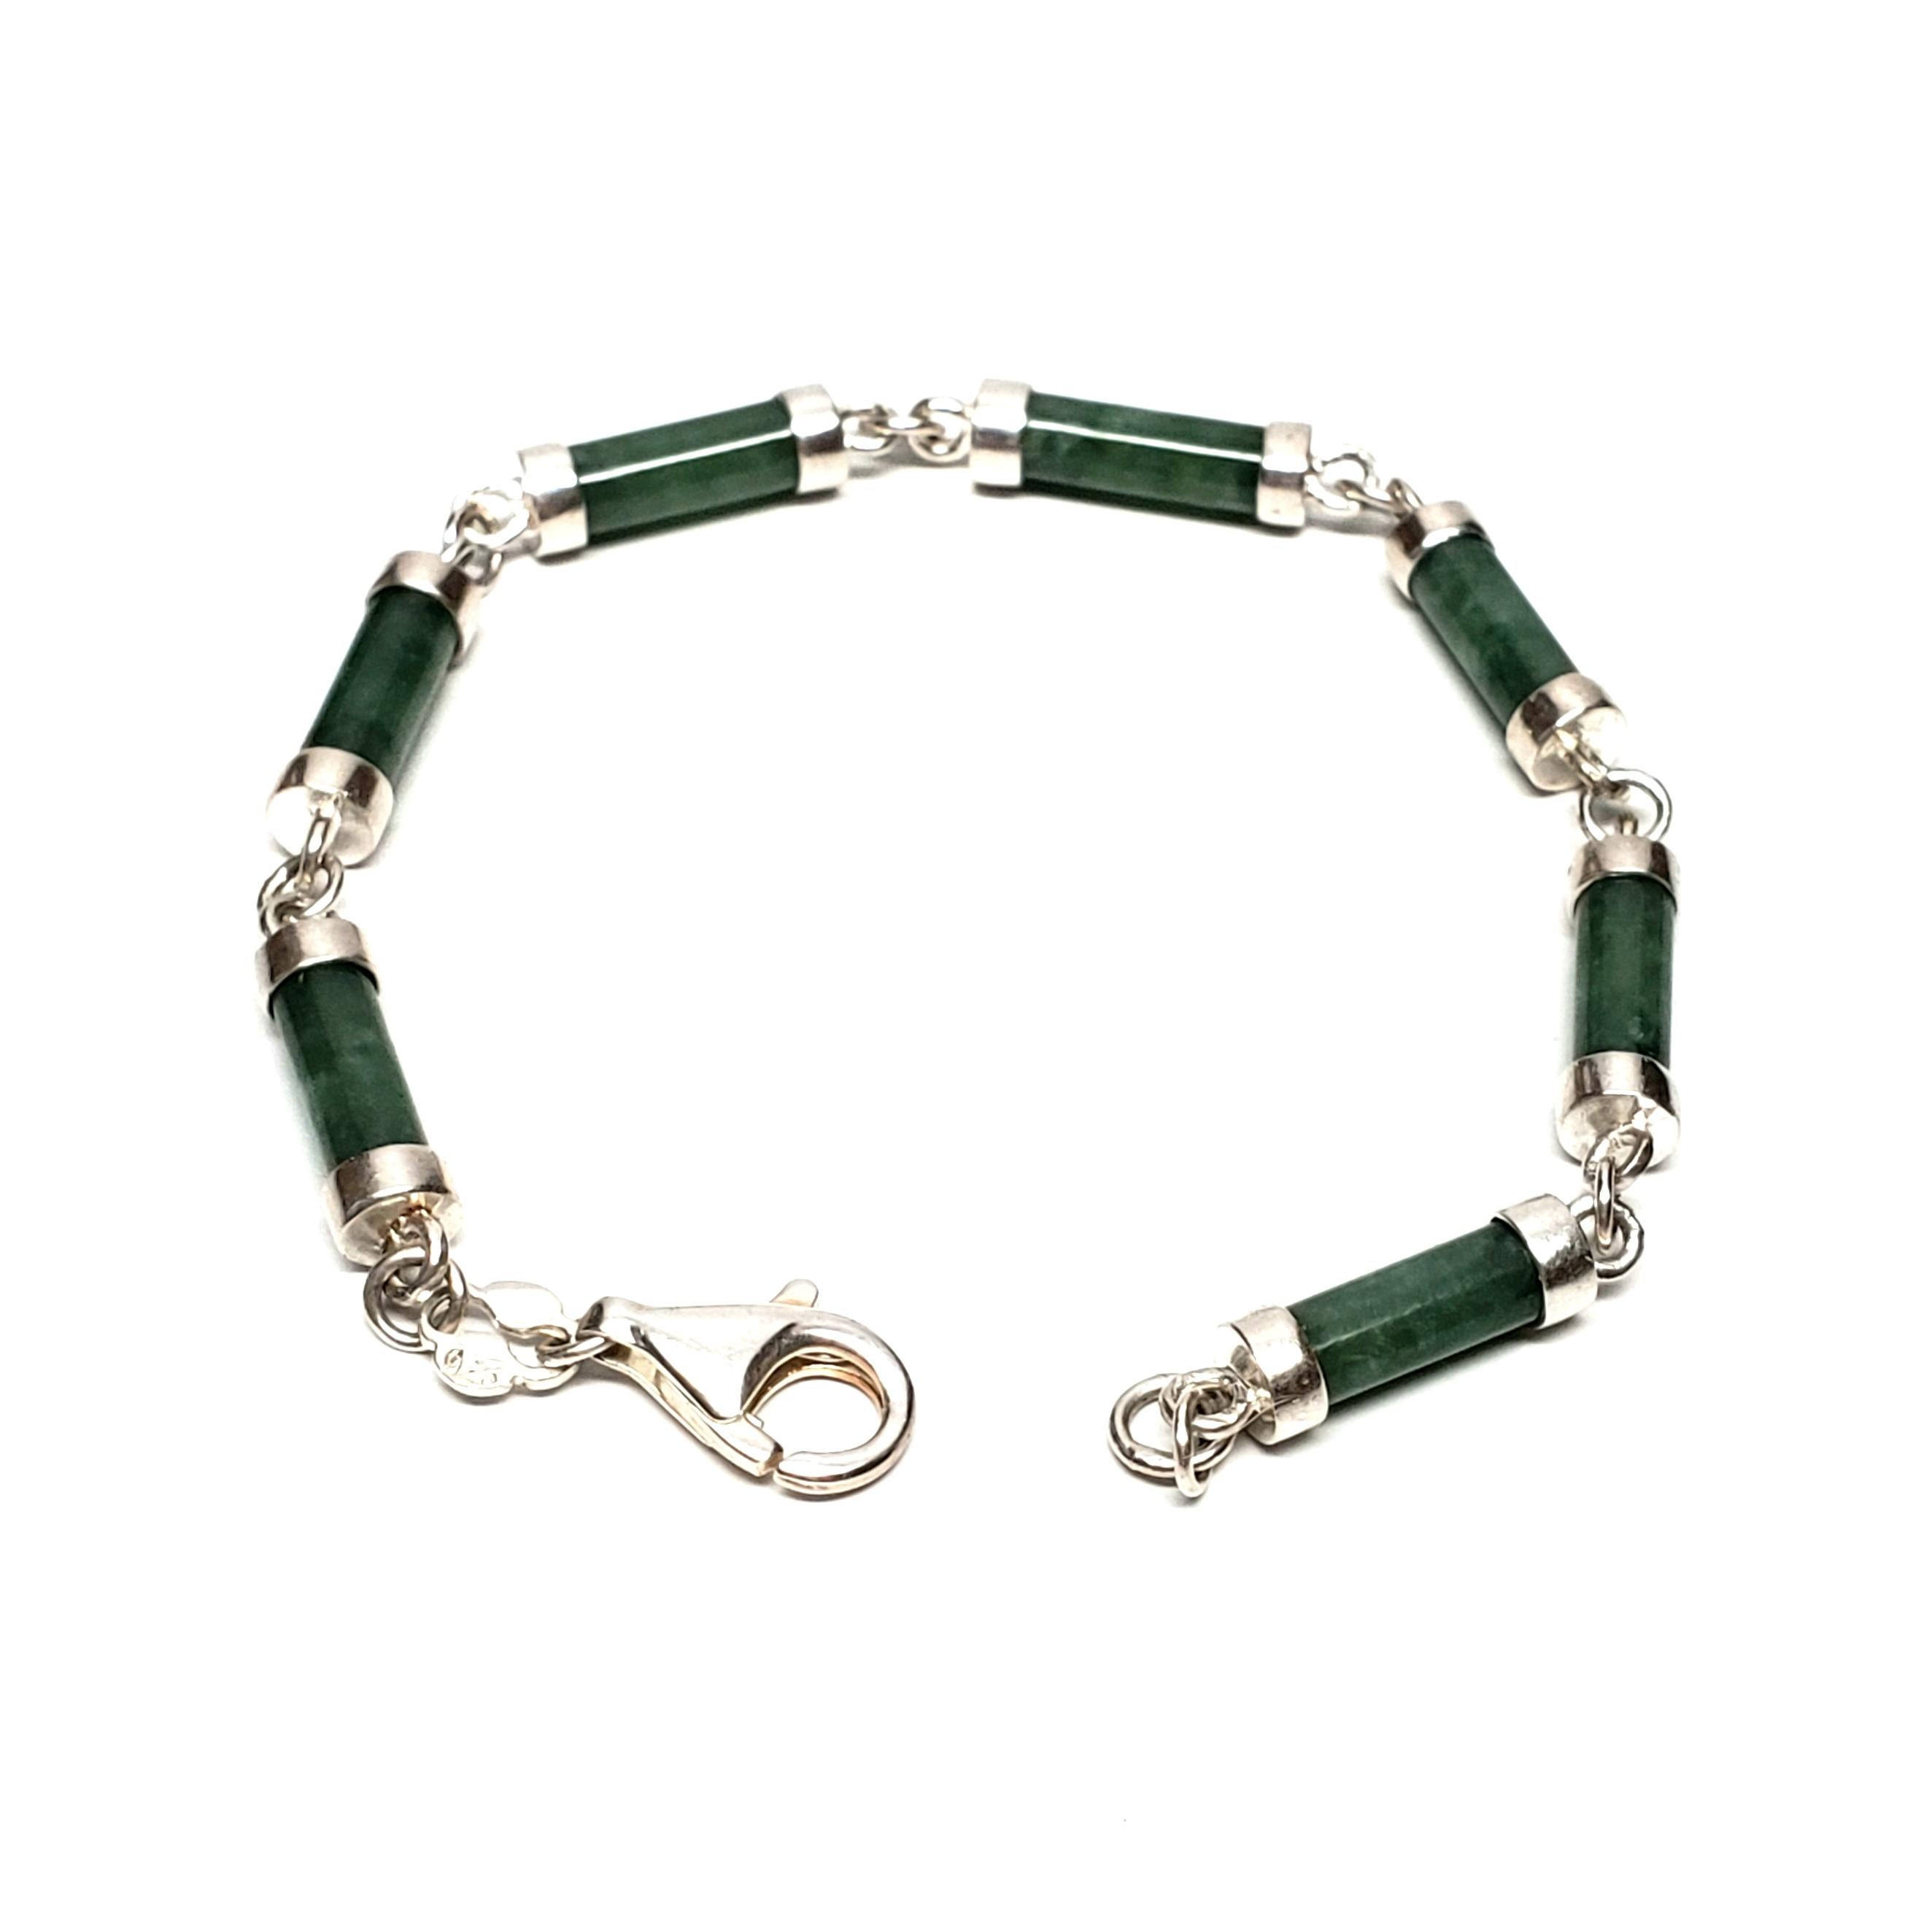 Sterling silver and green jade link bracelet.

Beautiful barrel shaped green jade links, lobster clasp closure.

Measures approx 6 1/2